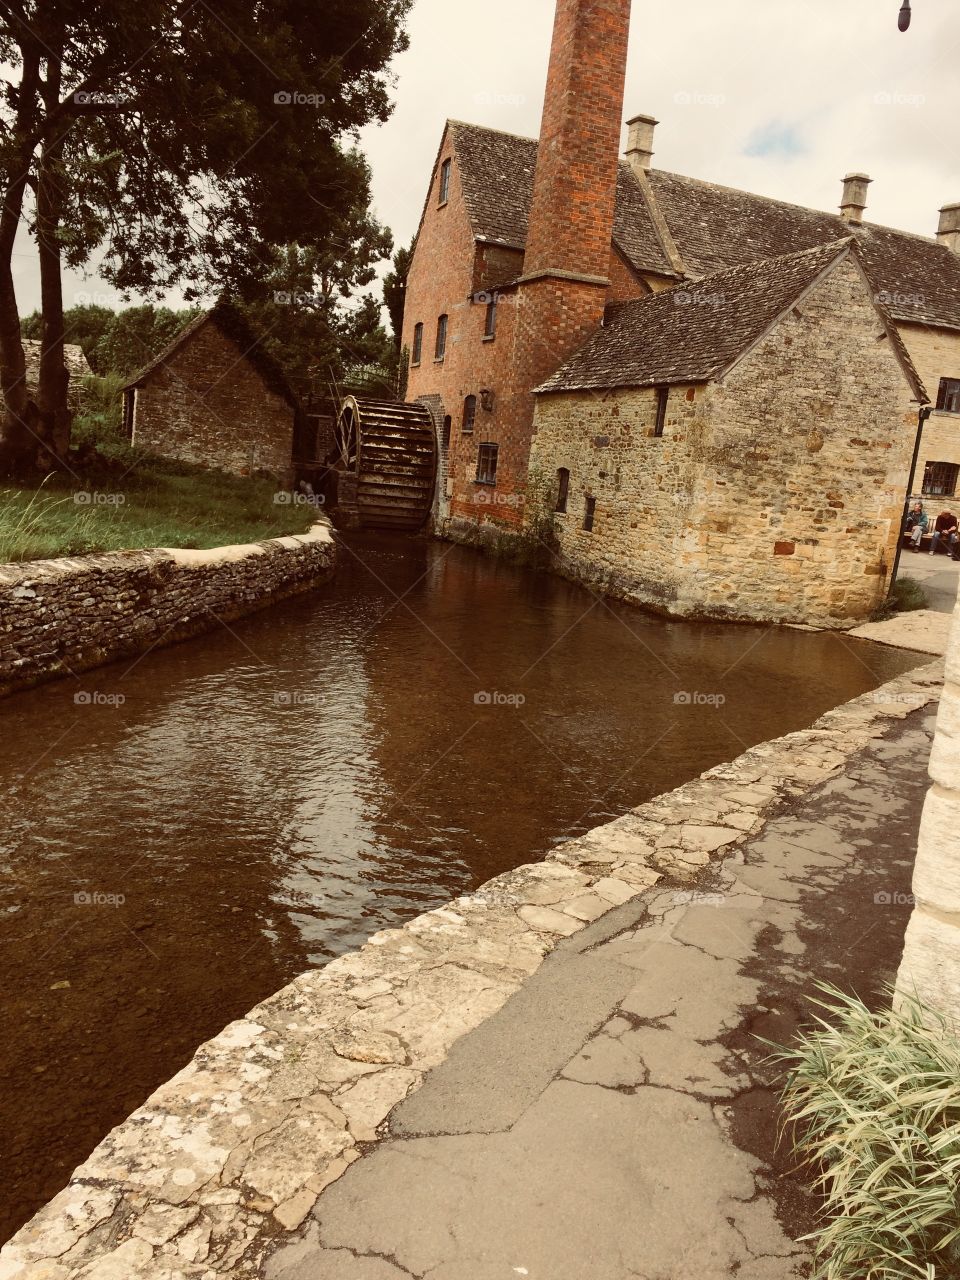 A simple picture taken from the Cotswolds, UK